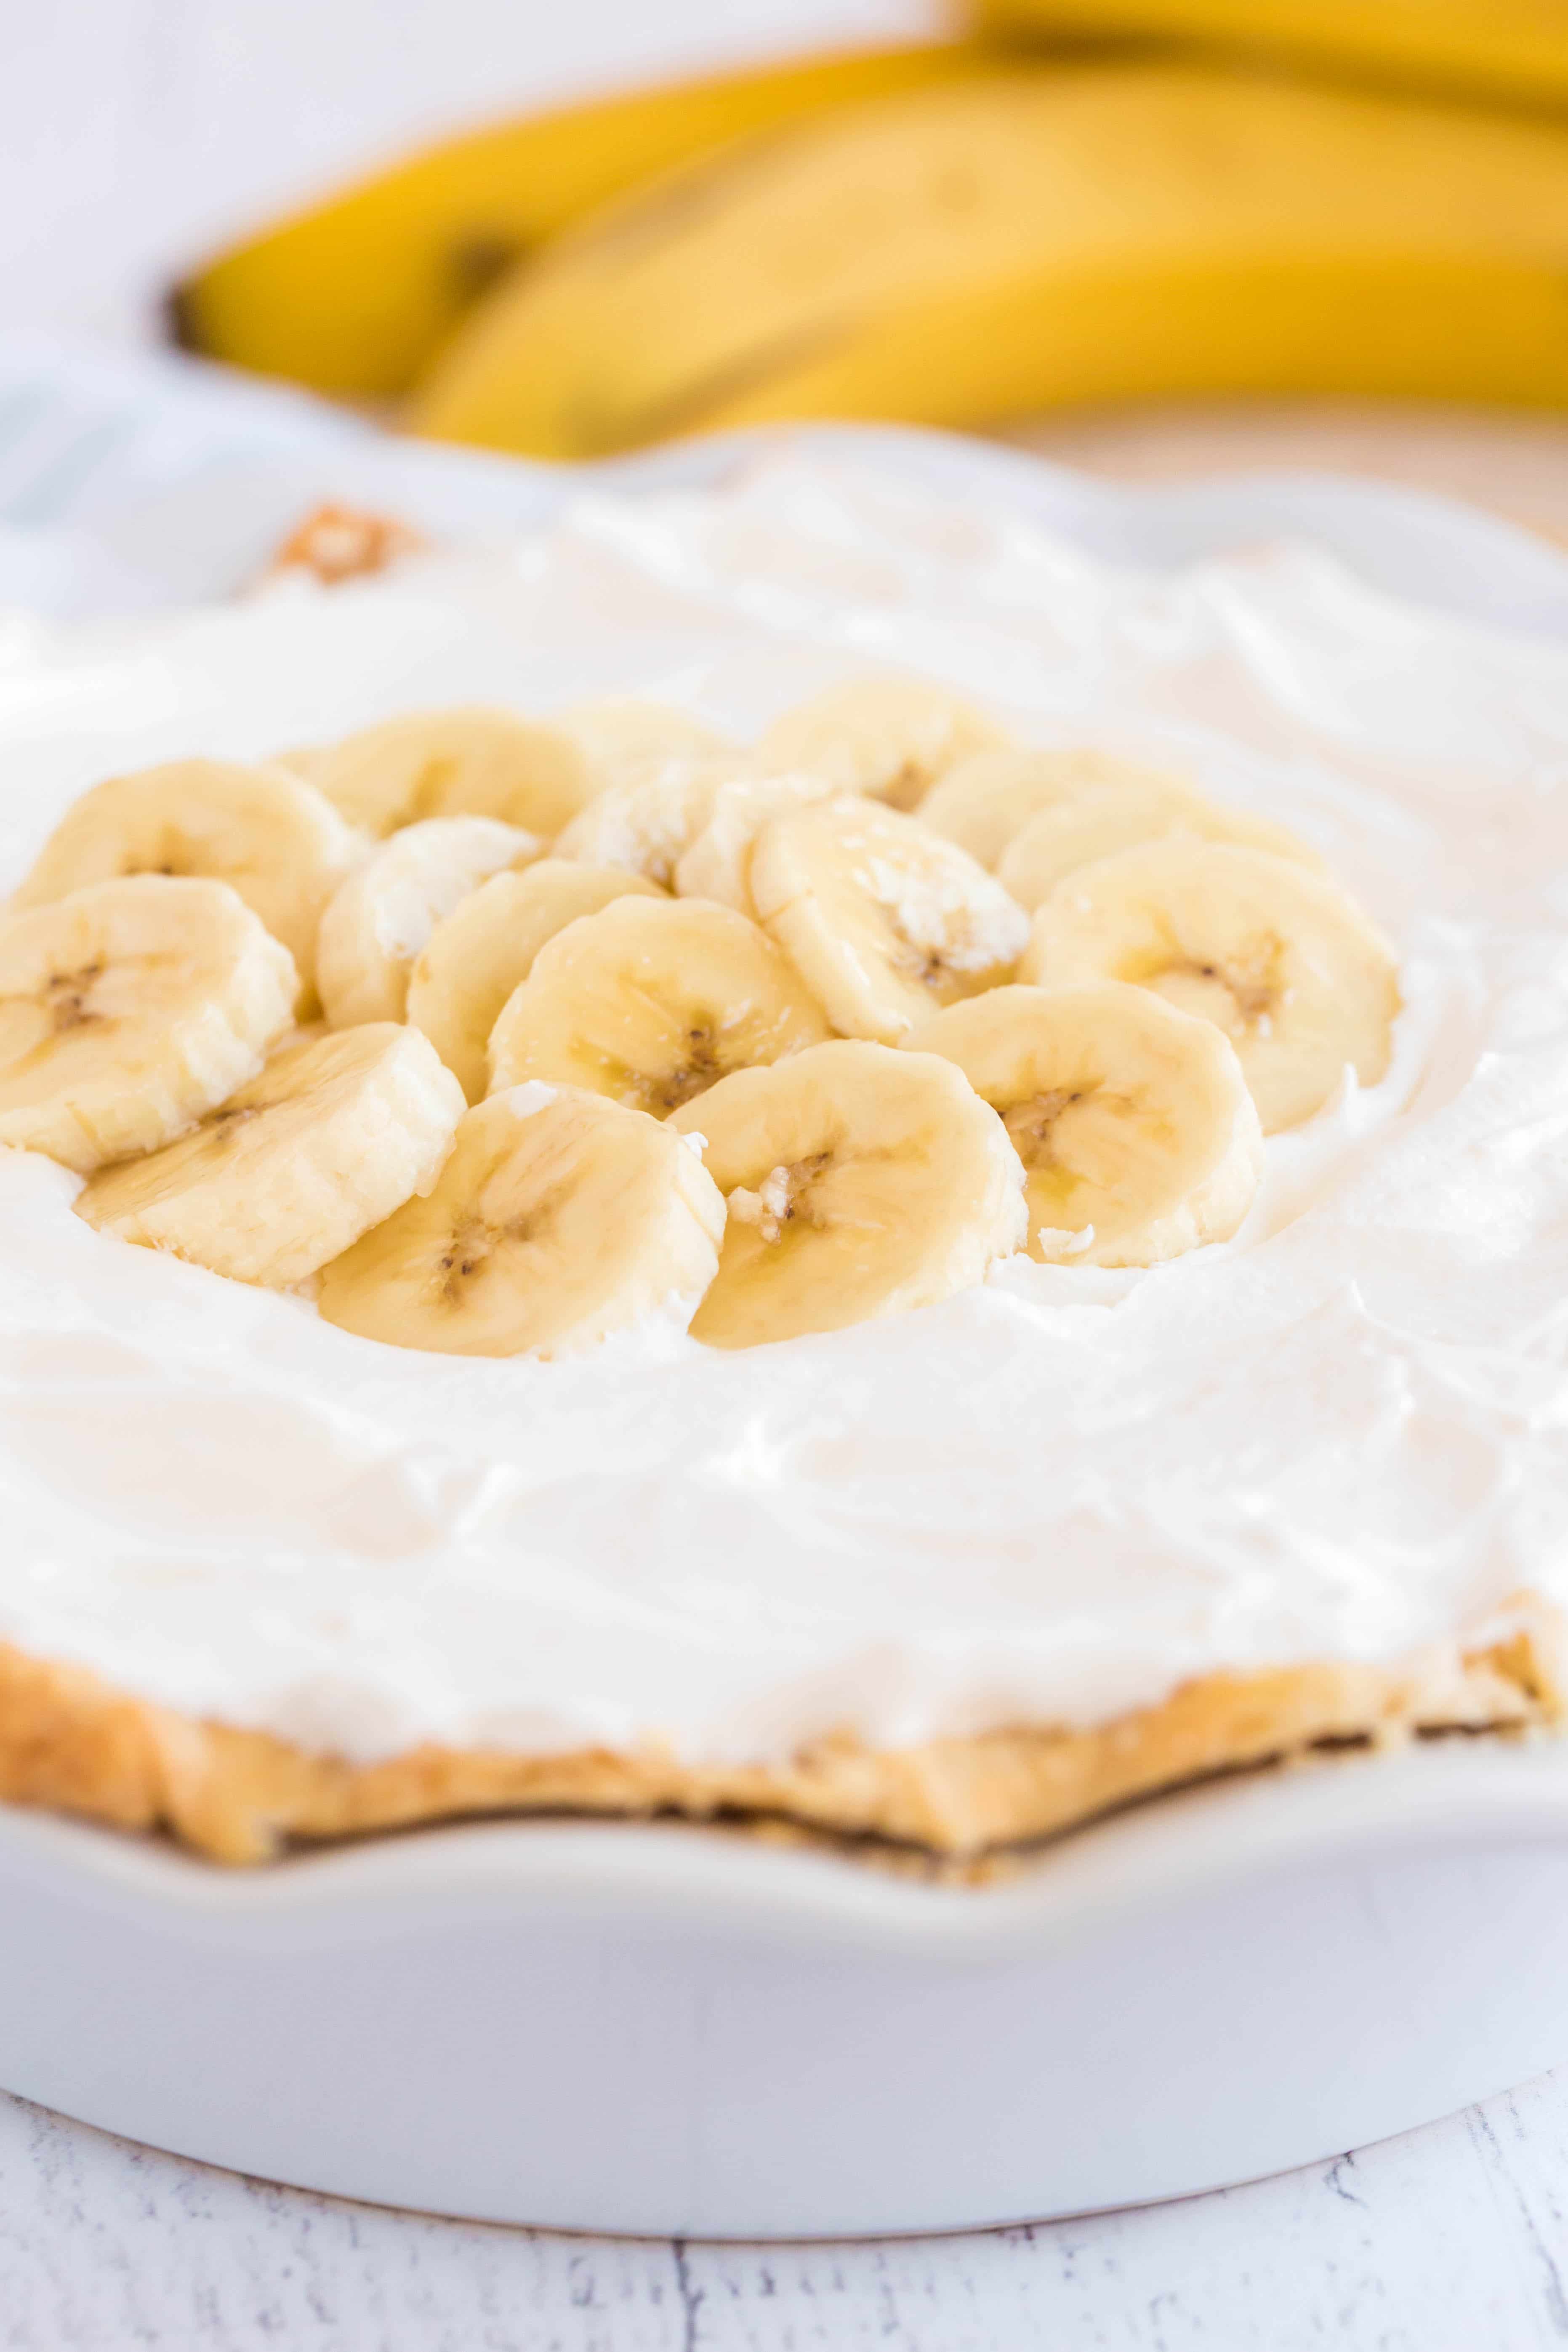 Banana Cream Pie with Whipped Cream on Top and Sliced Bananas